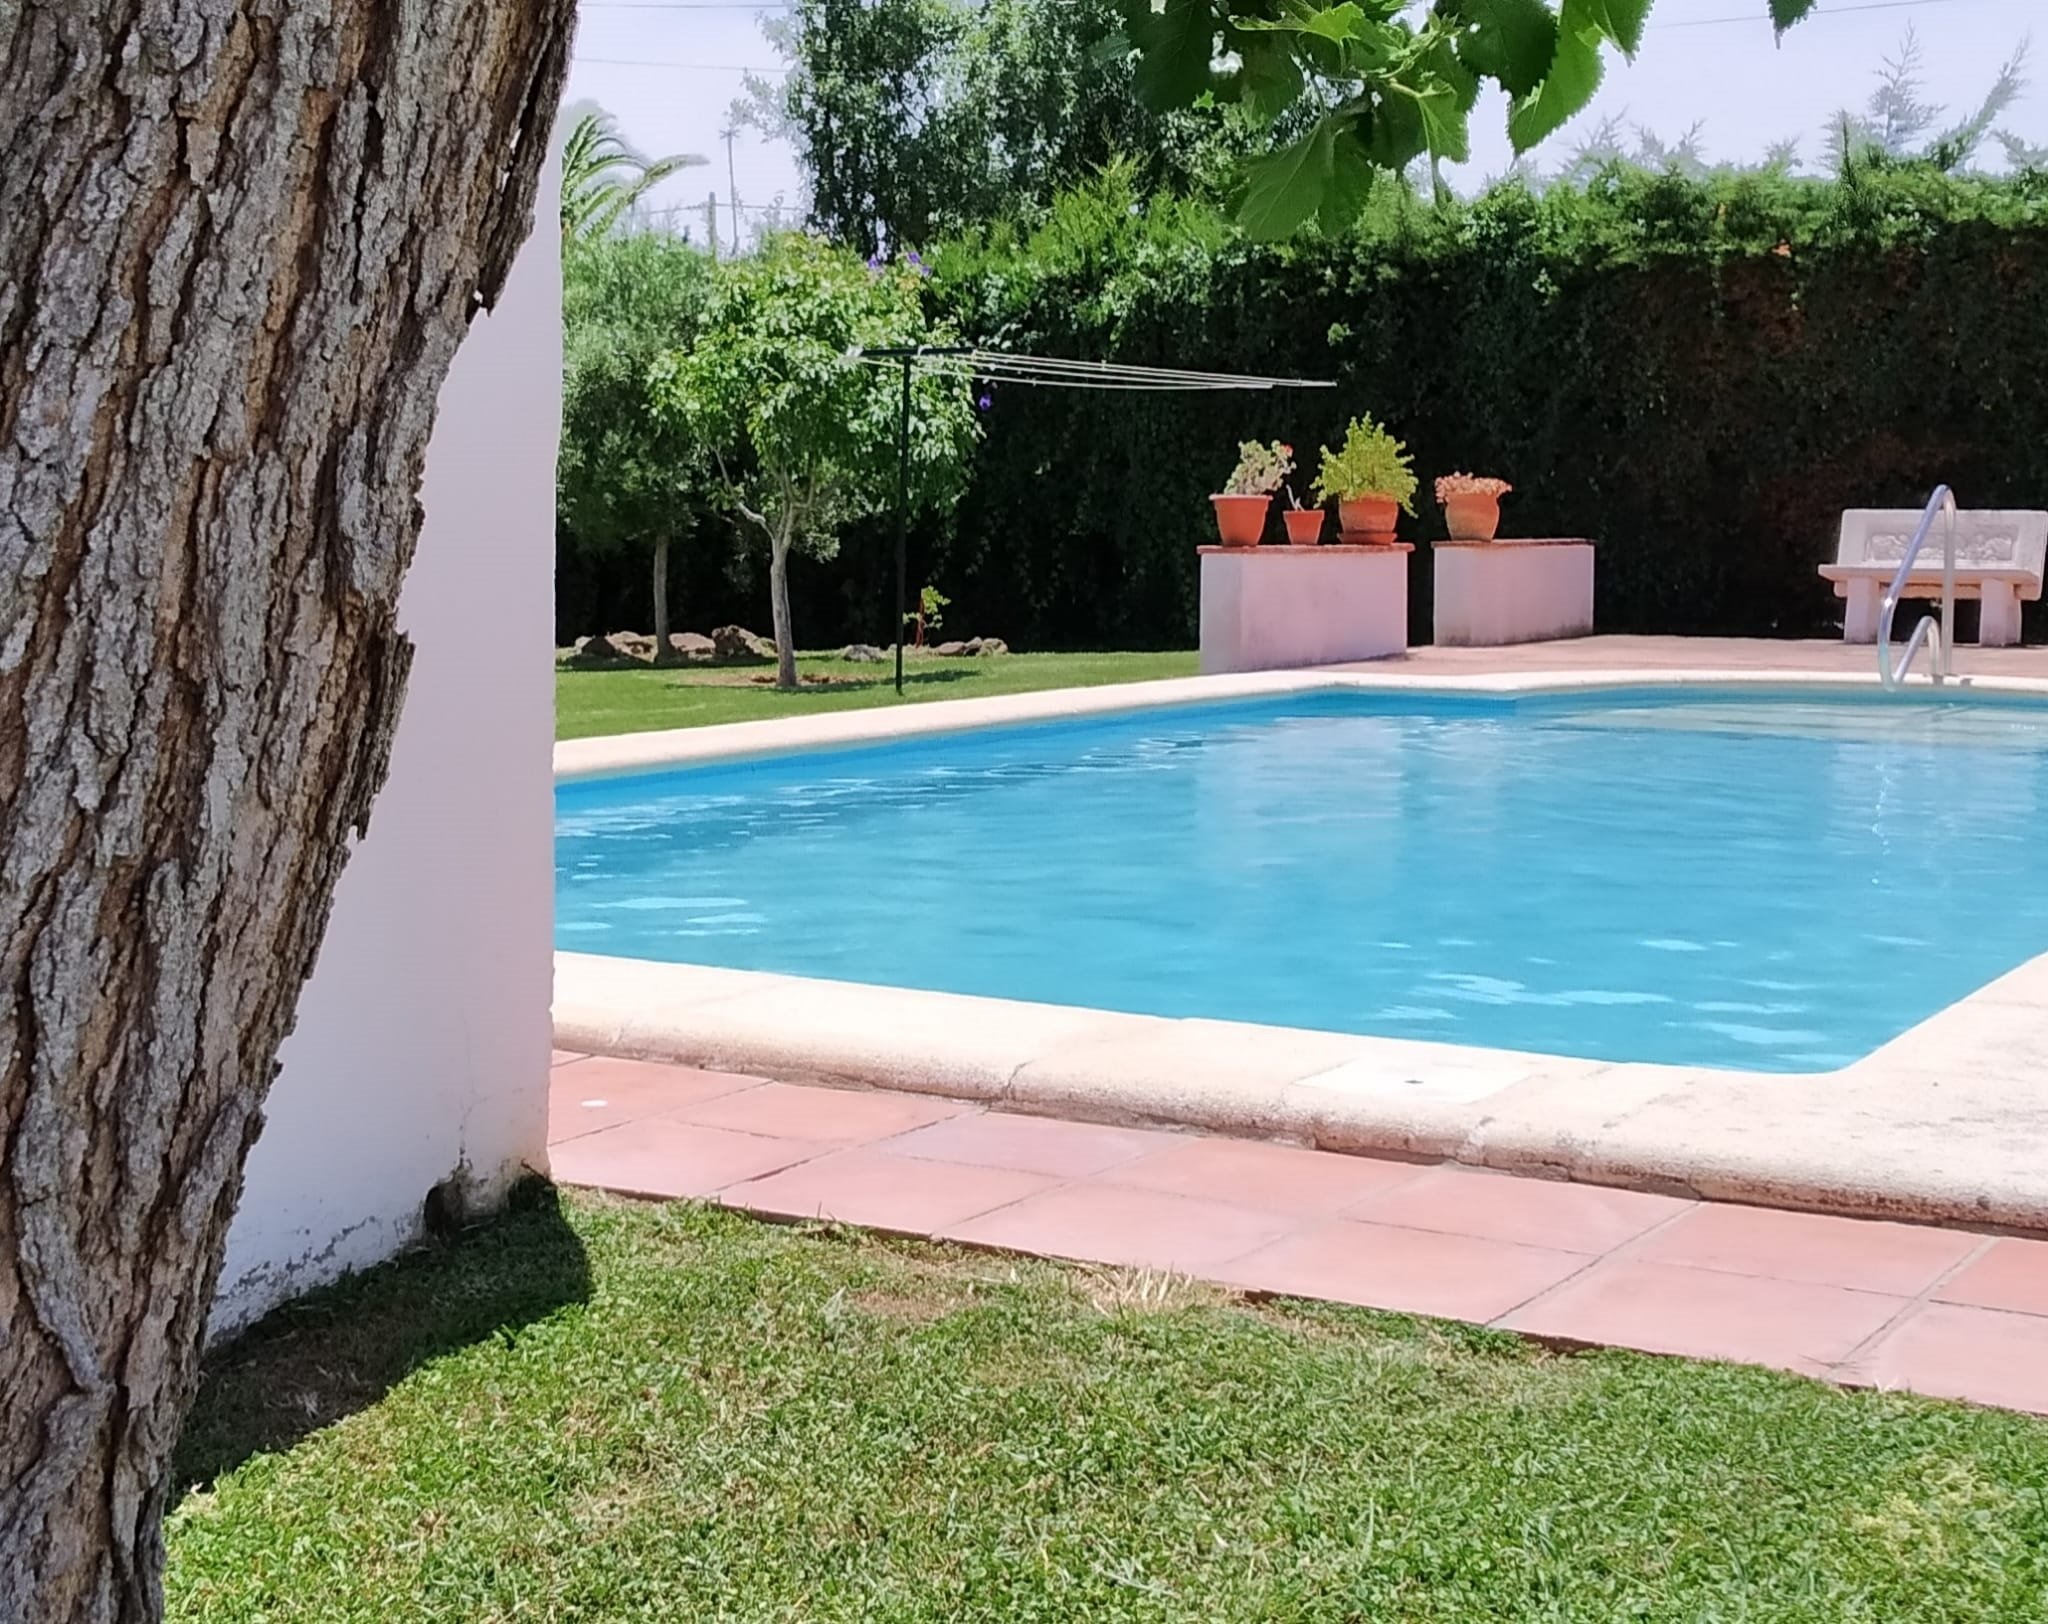 Catalonia's drought: the rule change allowing "climate shelter" swimming pools to remain in use